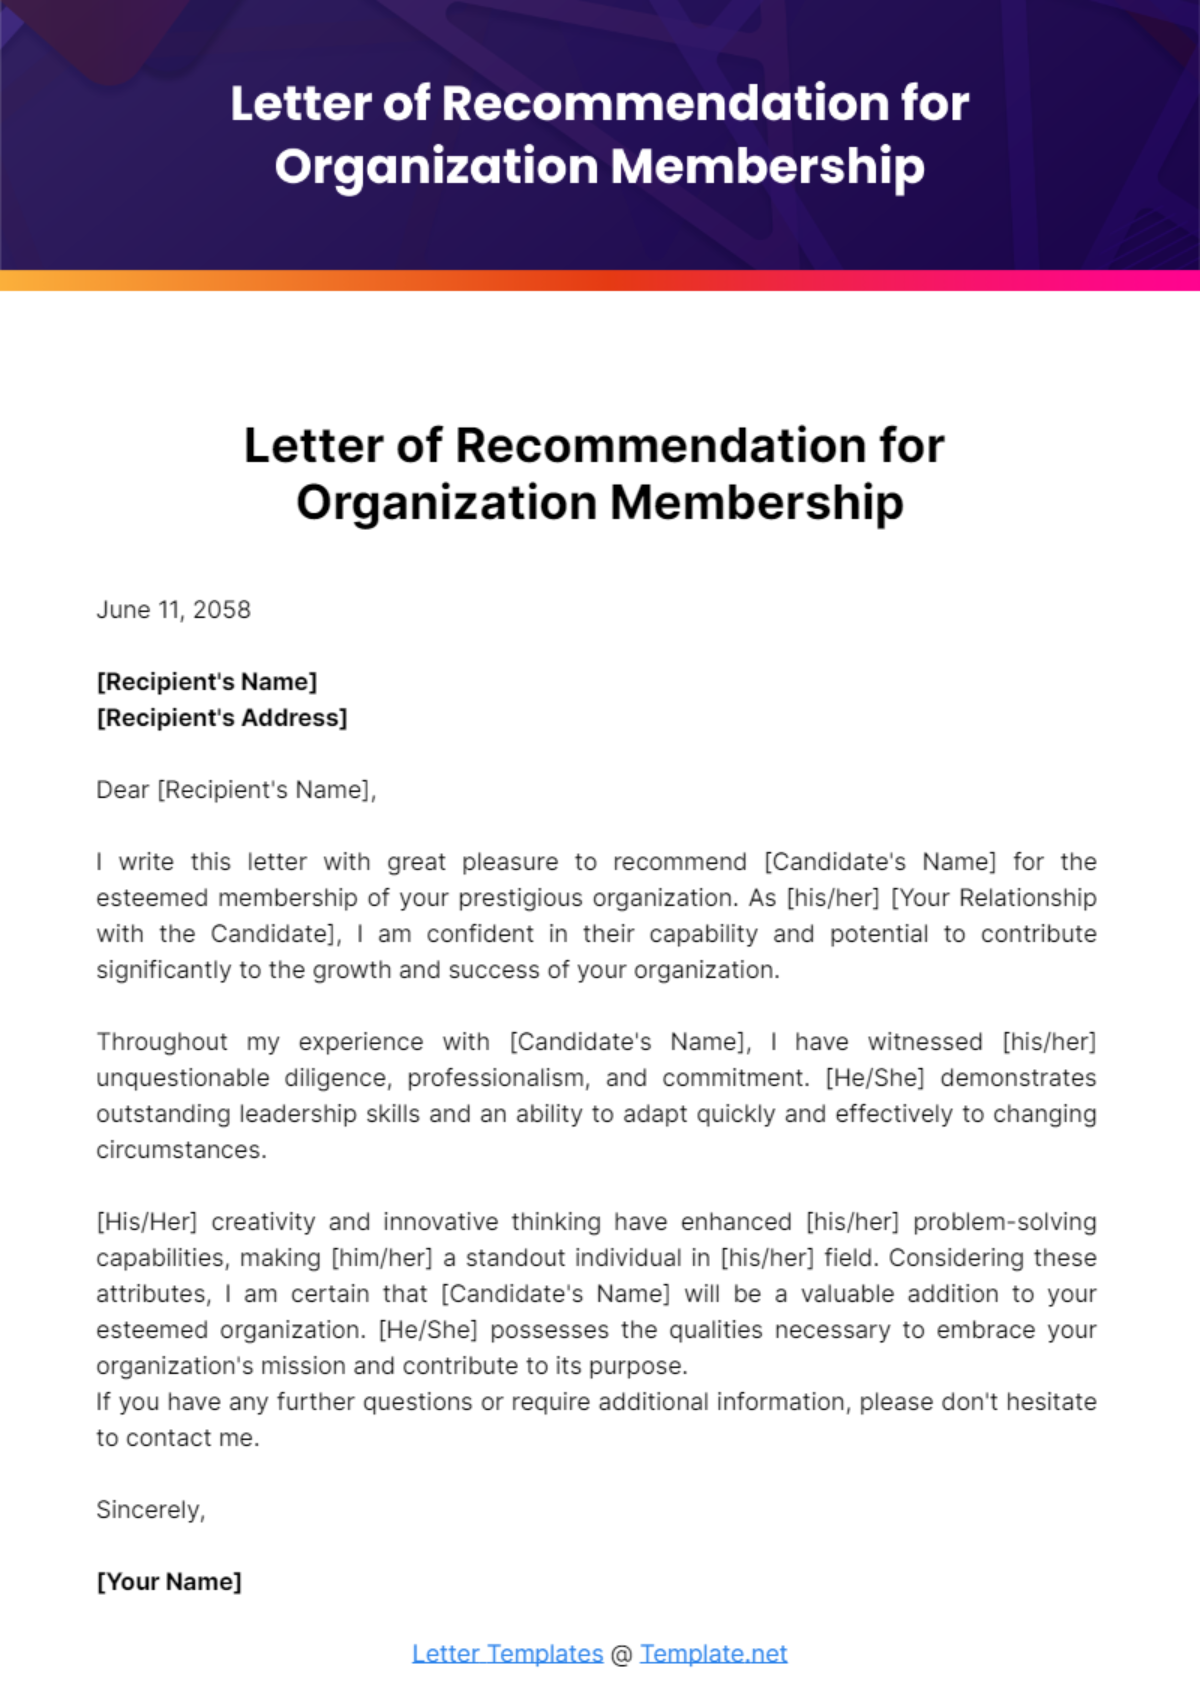 Free Letter of Recommendation for Organization Membership Template